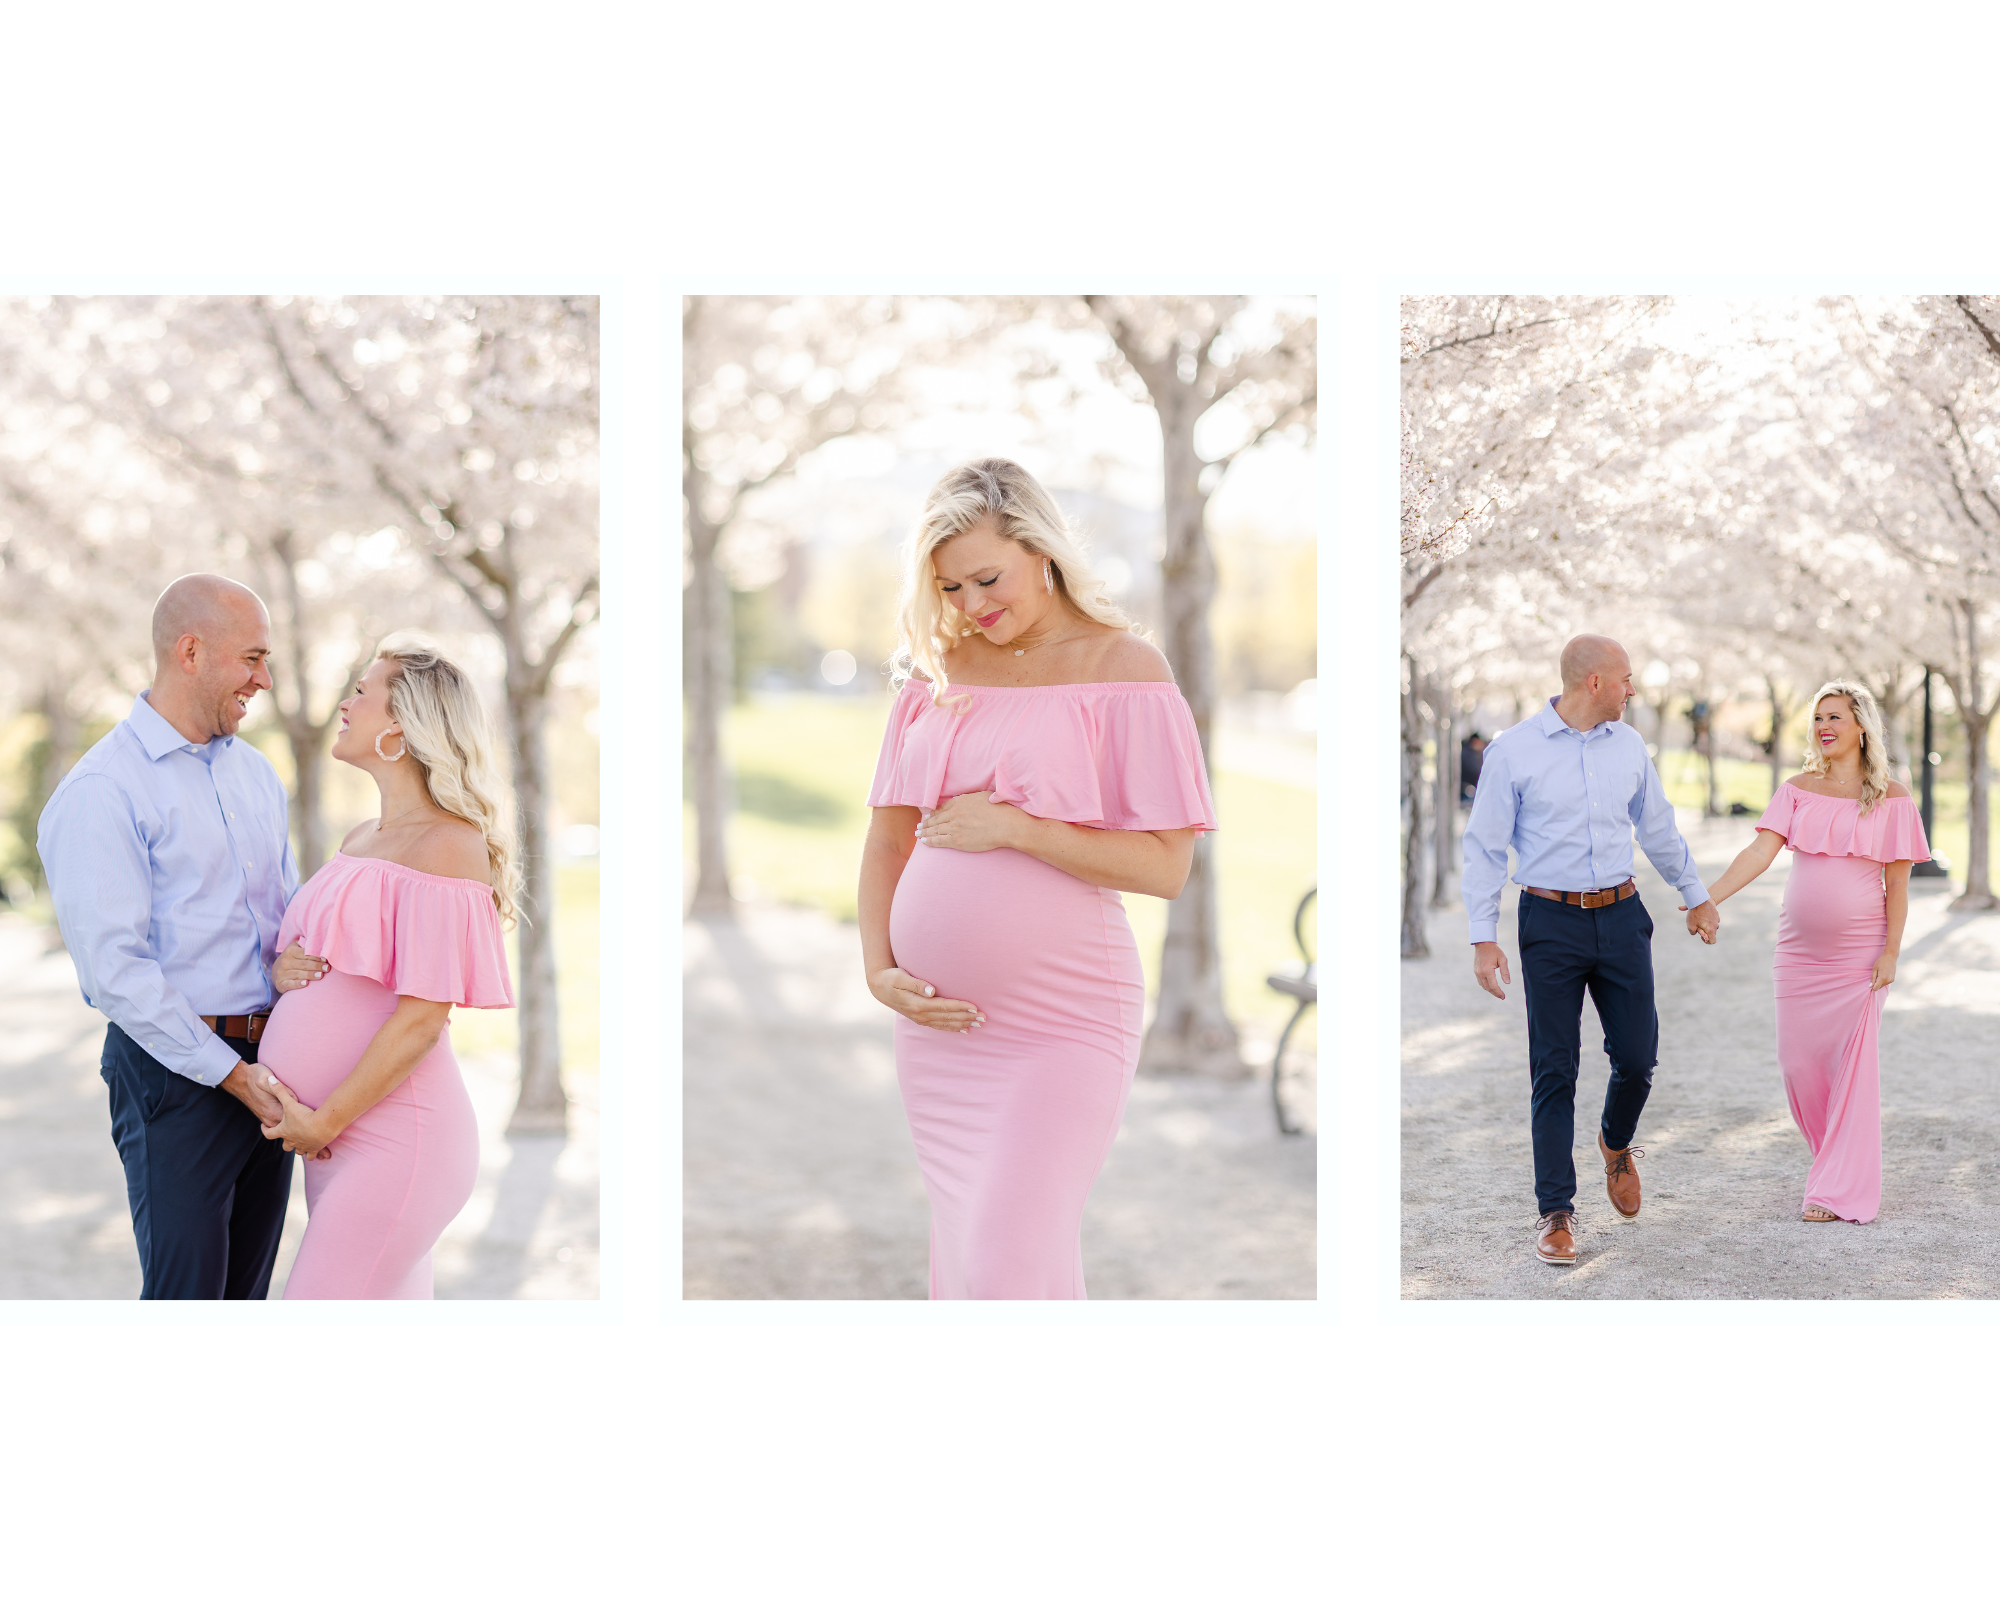 Maternity photoshoot with husband and wife